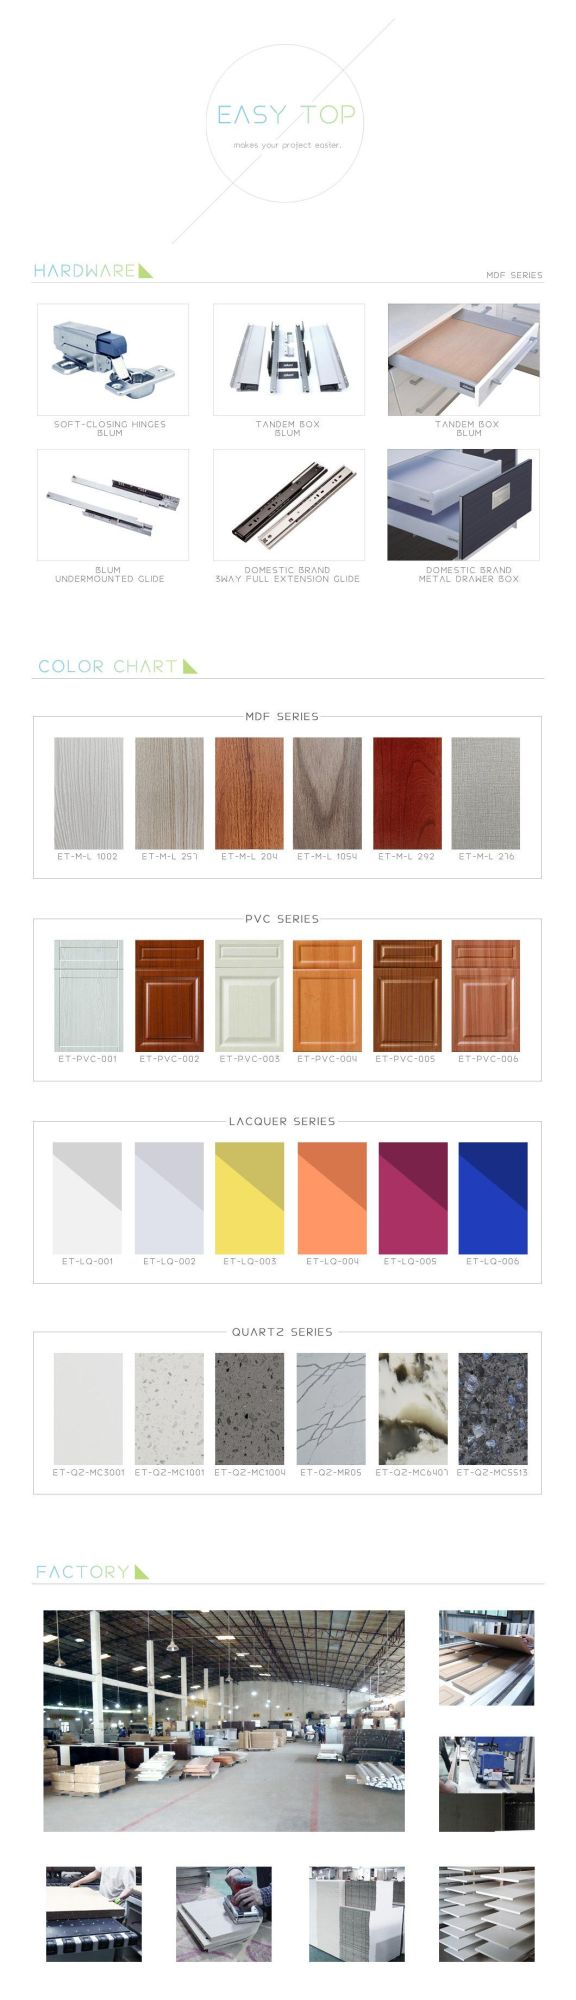 Luxury Resistant PVC Option Classical Cupboard White Shaker Kitchen Units Cabinets Furniture